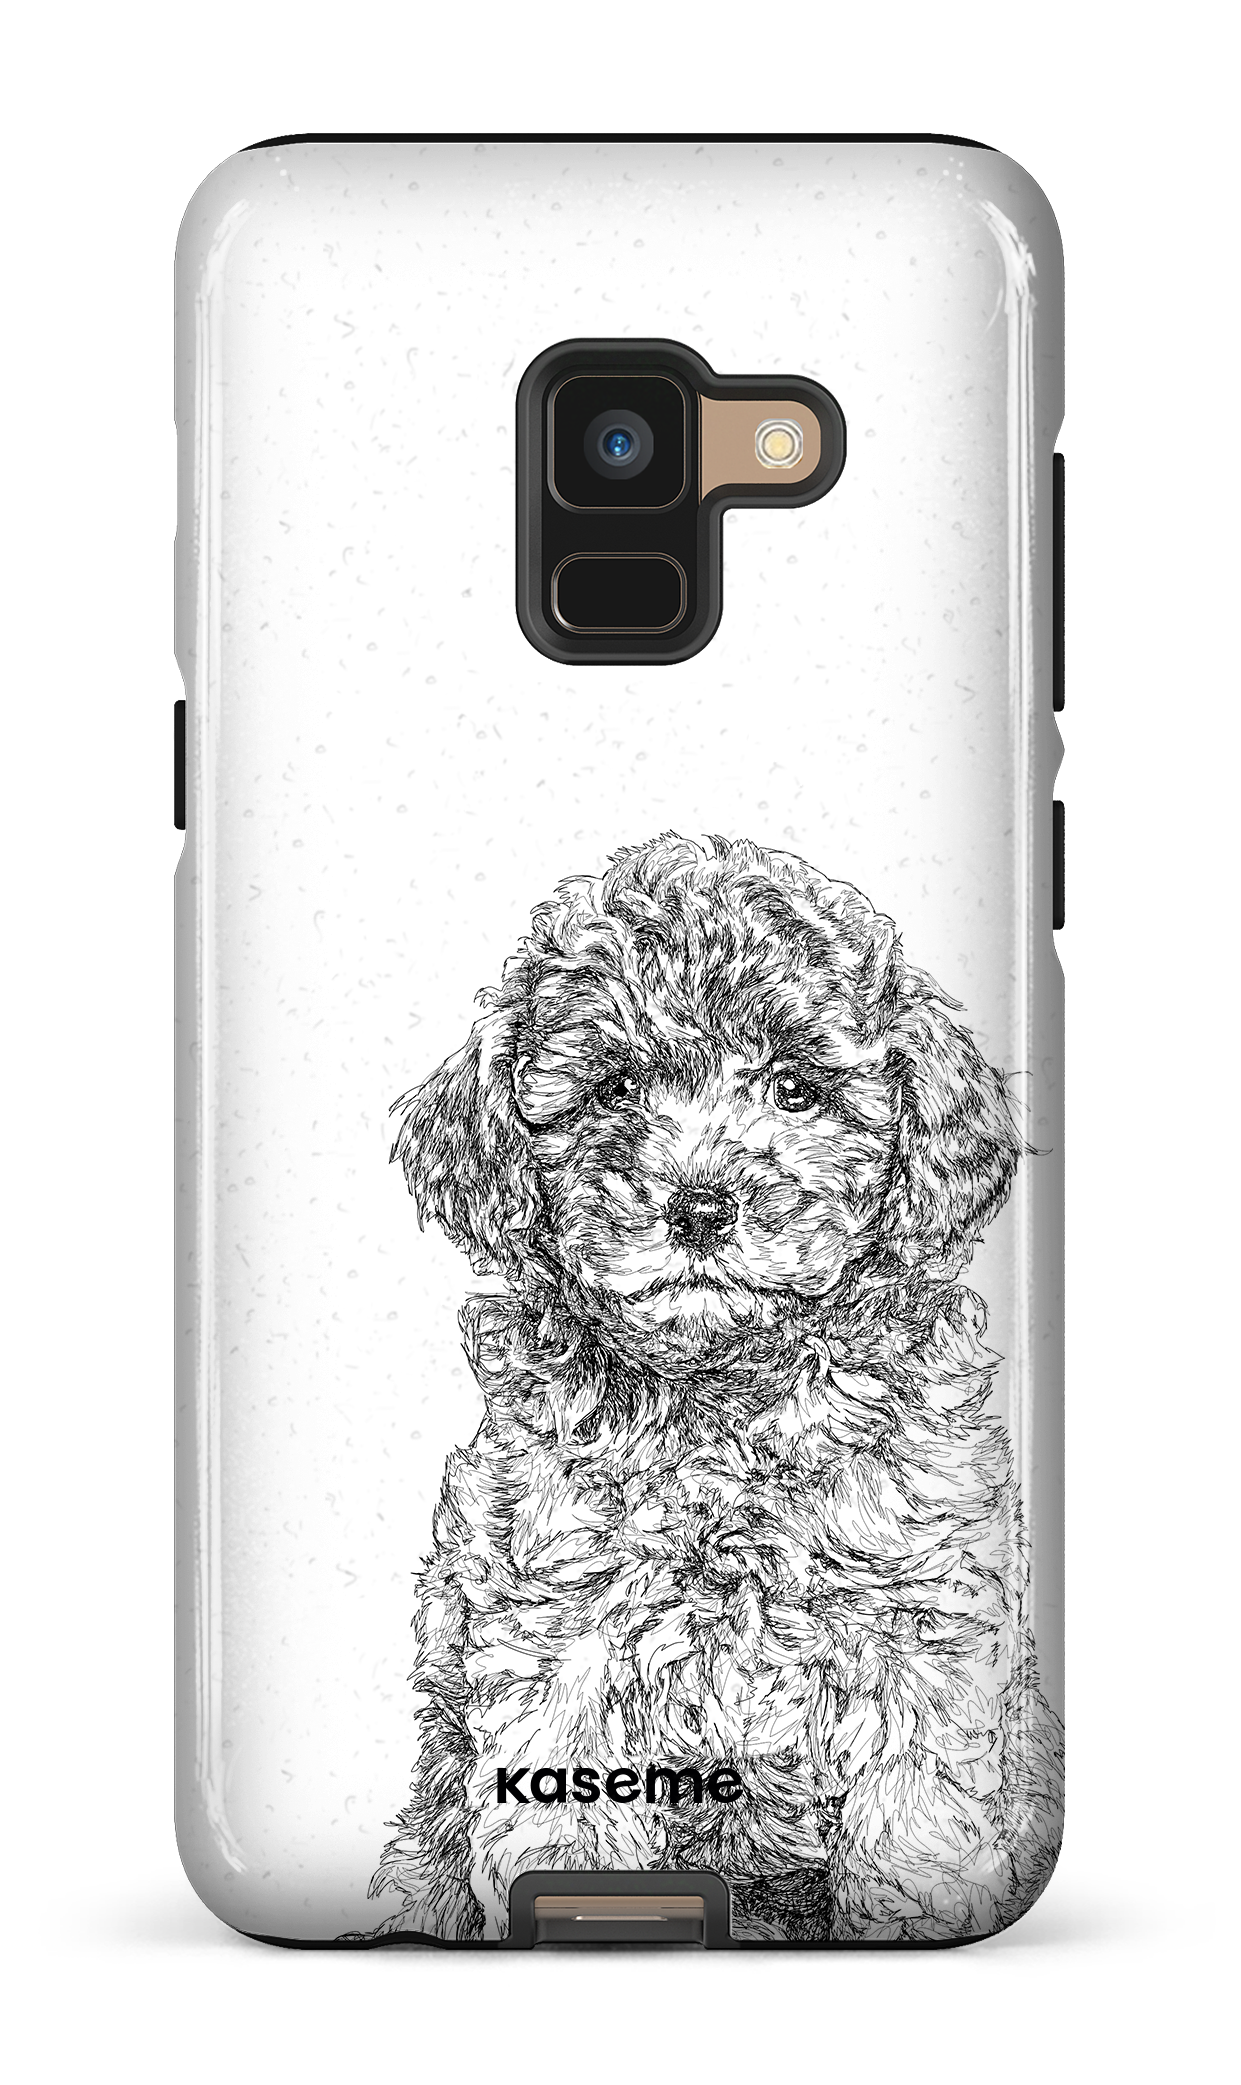 Toy Poodle - Galaxy A8